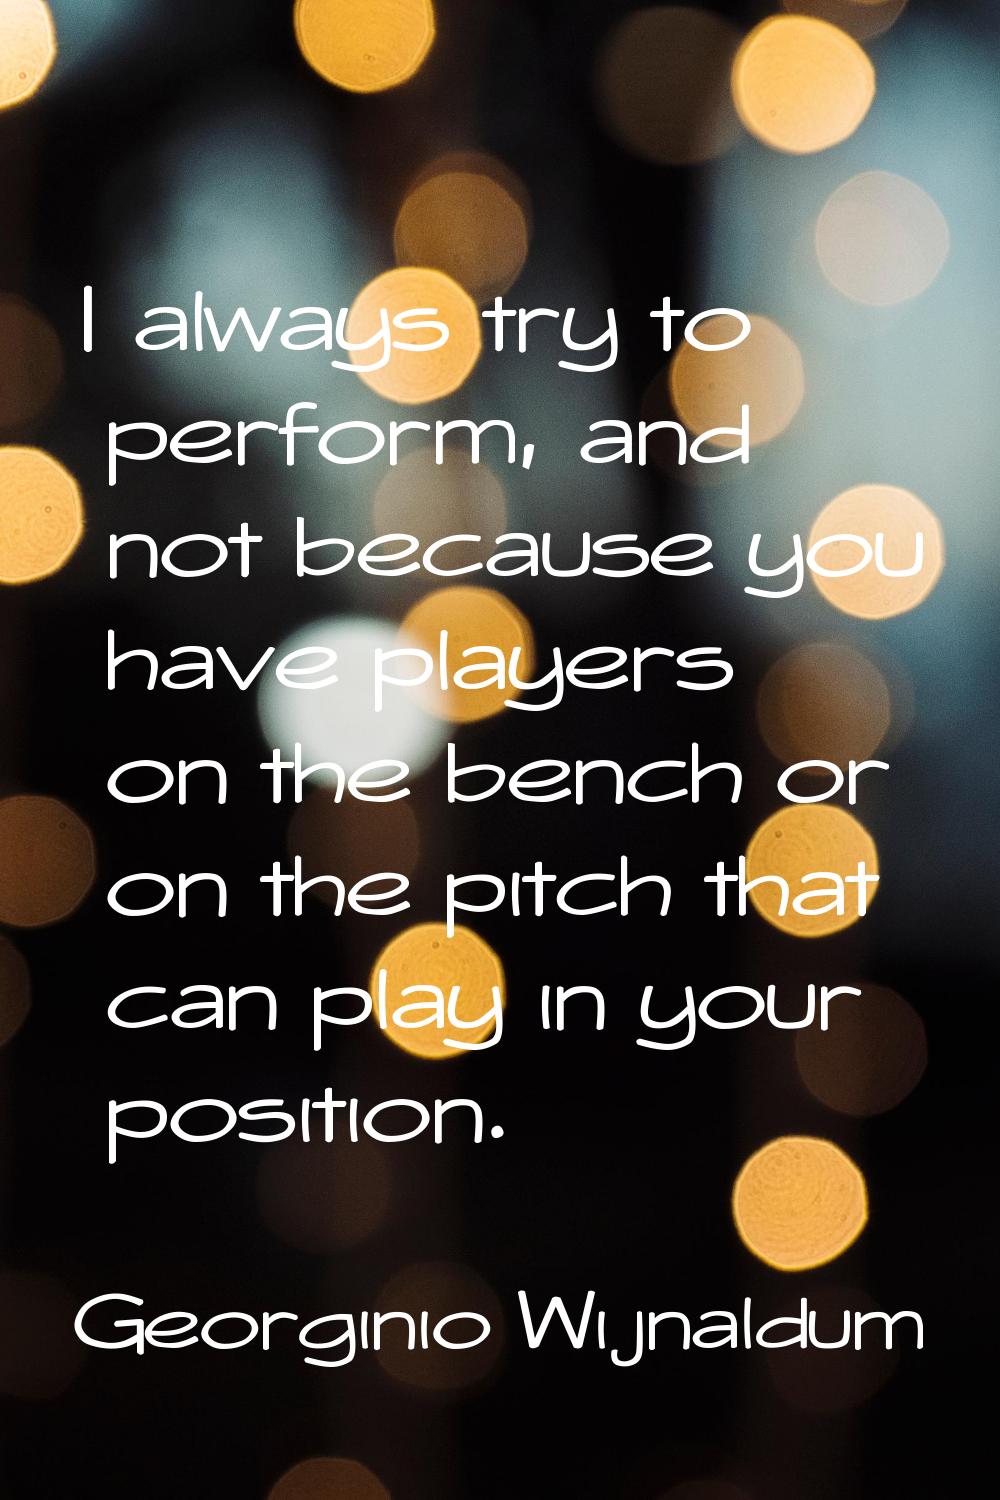 I always try to perform, and not because you have players on the bench or on the pitch that can pla